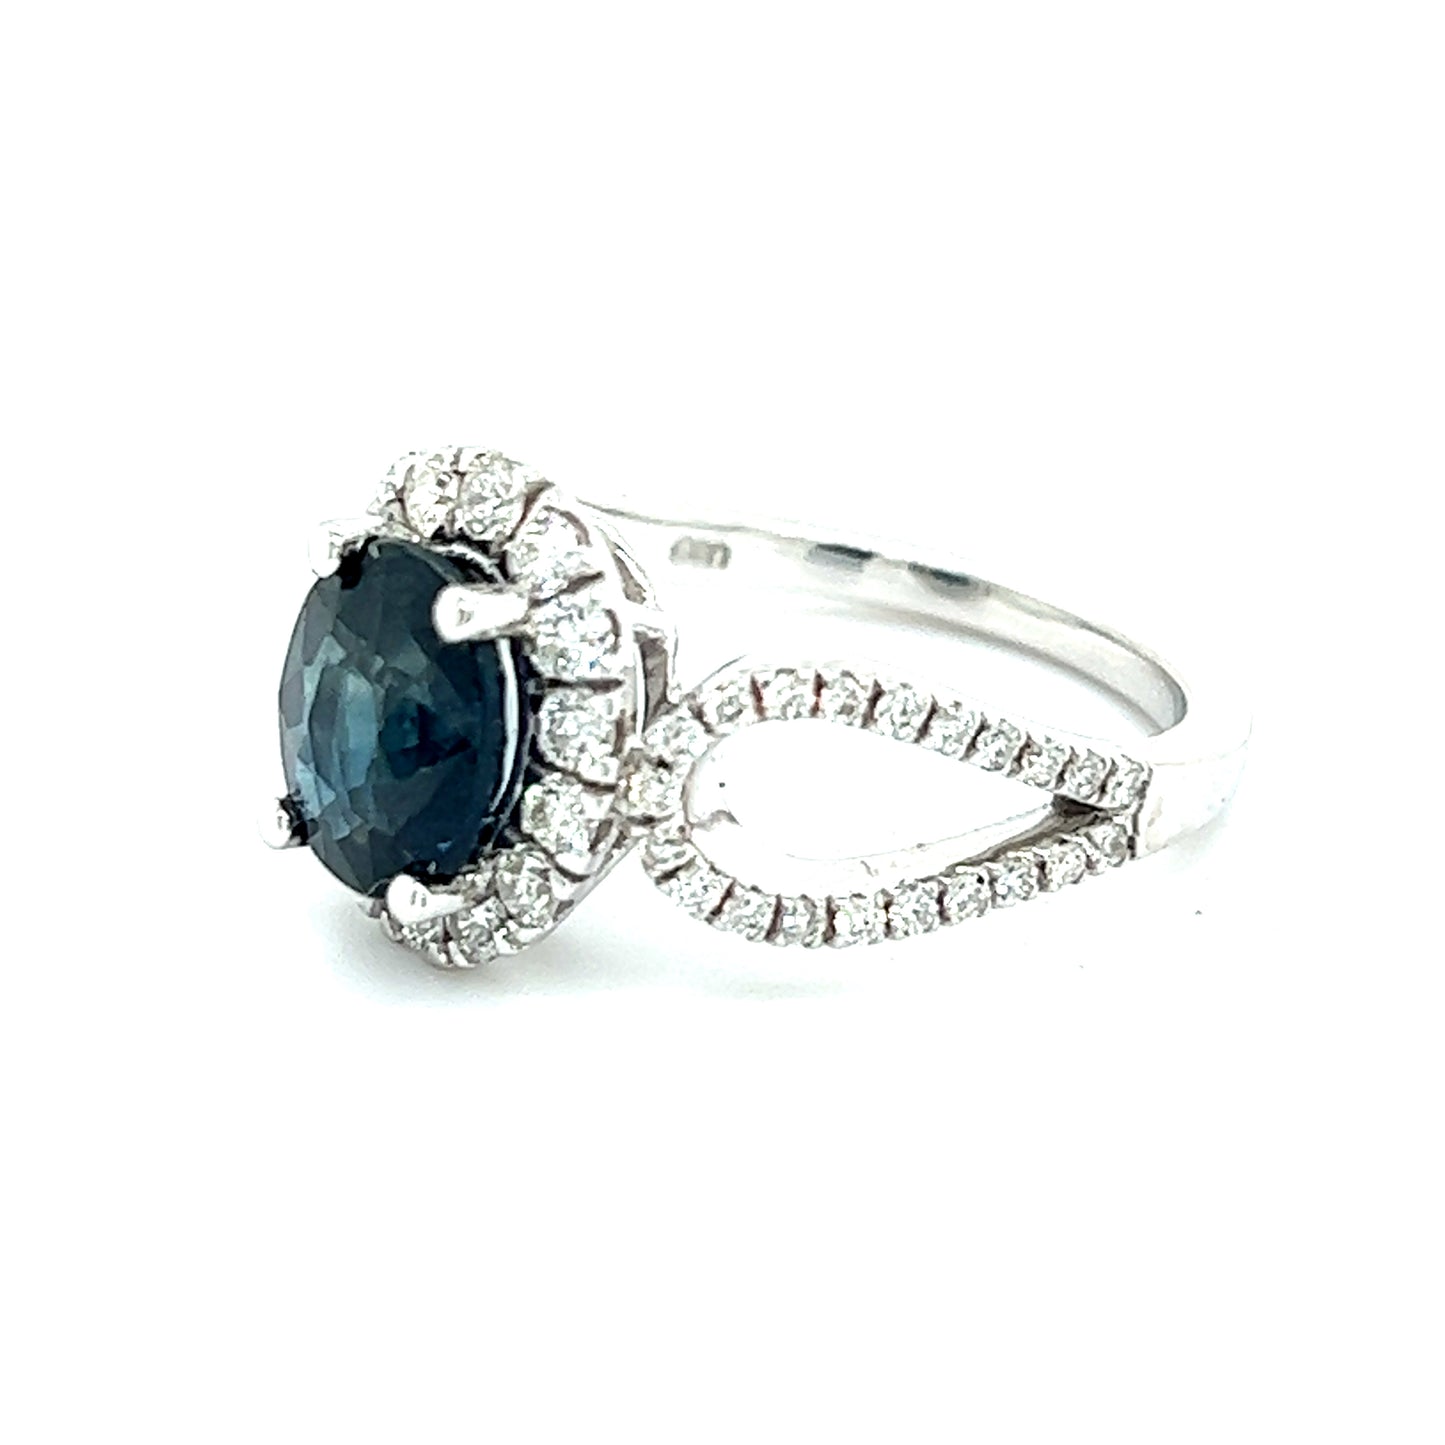 Natural Sapphire Diamond Ring Size 6.25 14k W Gold 2.93 TCW Certified $5,950 216682